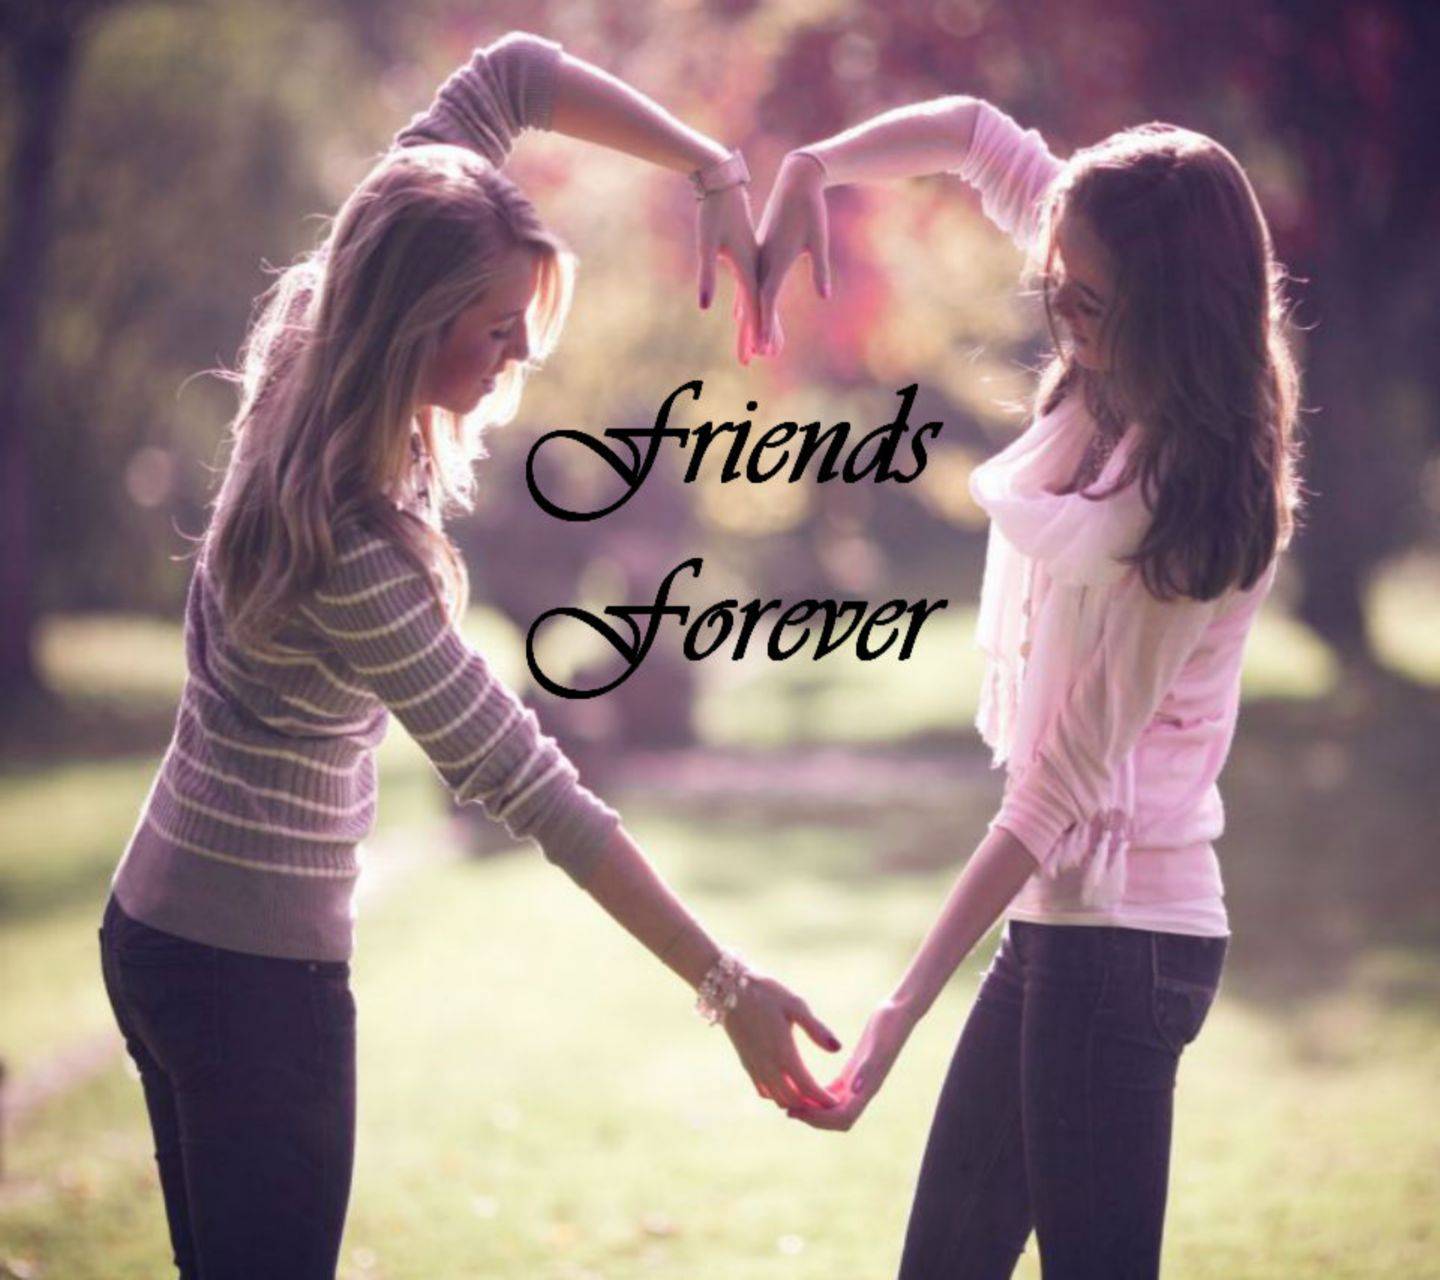 Download free friendship wallpaper for your mobile phone